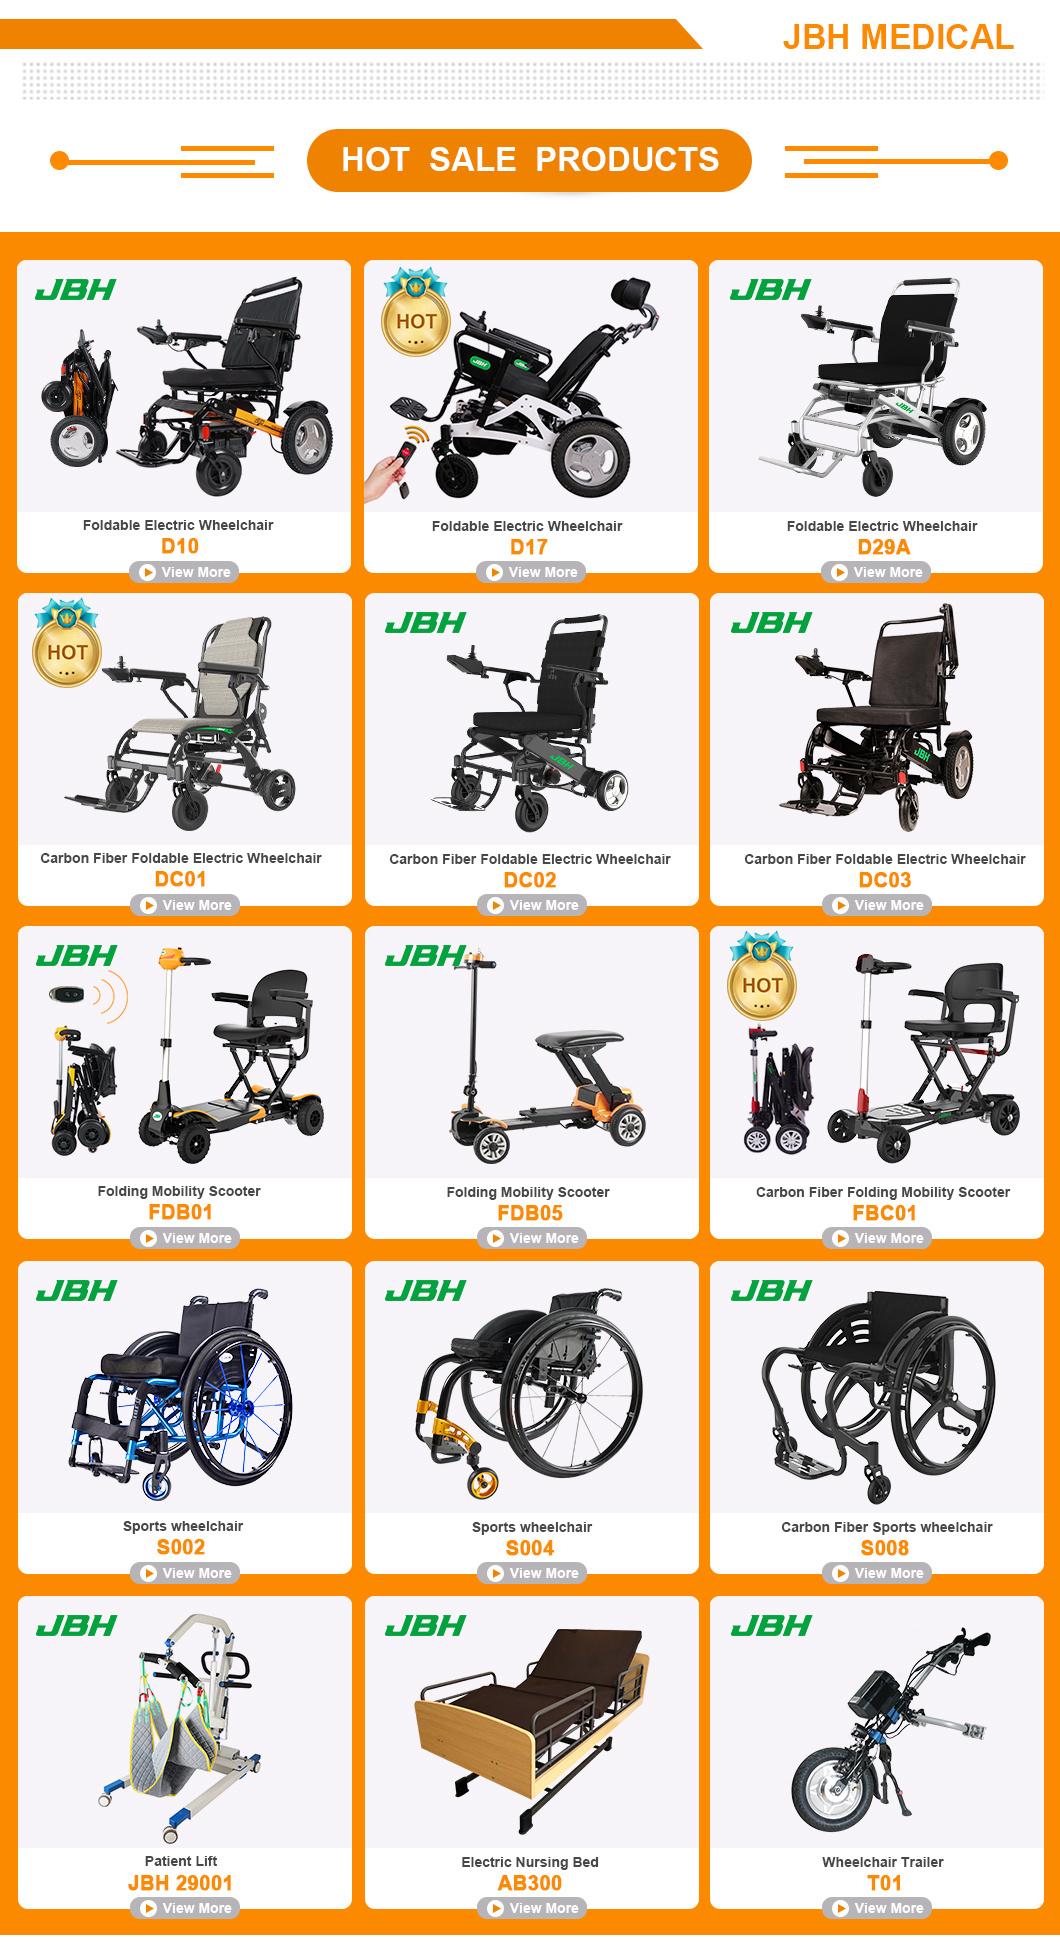 OEM ODM Portable Motorized Electric Wheelchair Handicapped Folding Power Chair